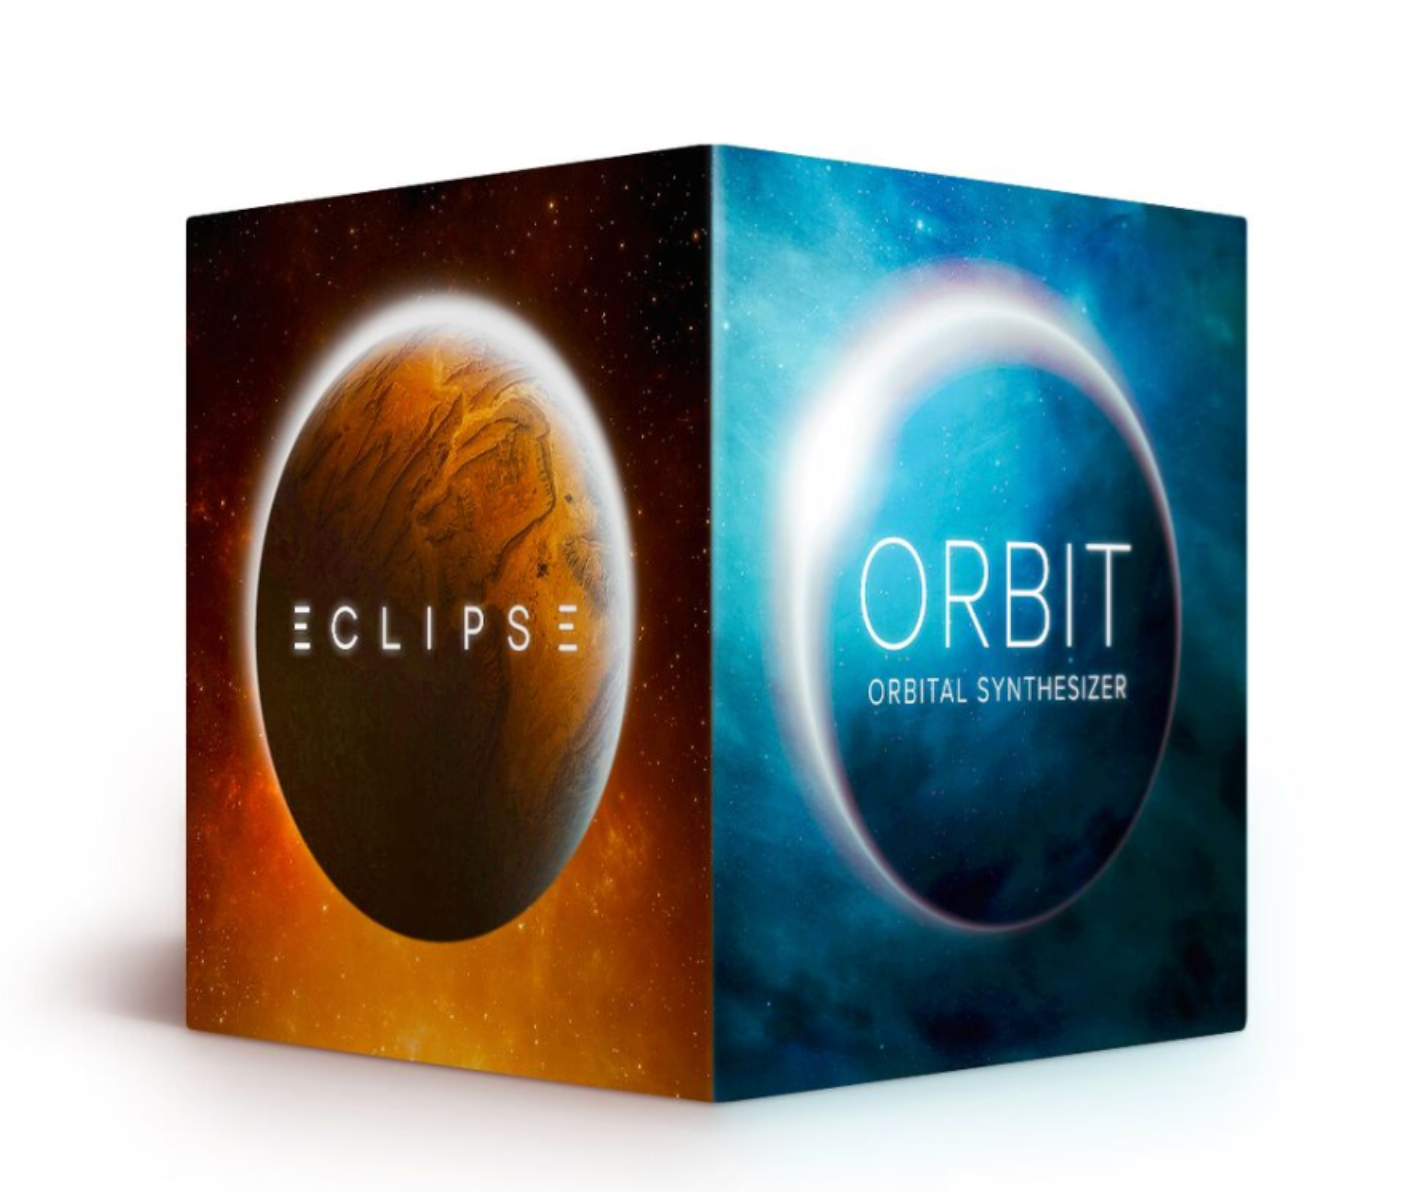 Review: Orbit and Eclipse by Wide Blue Sound